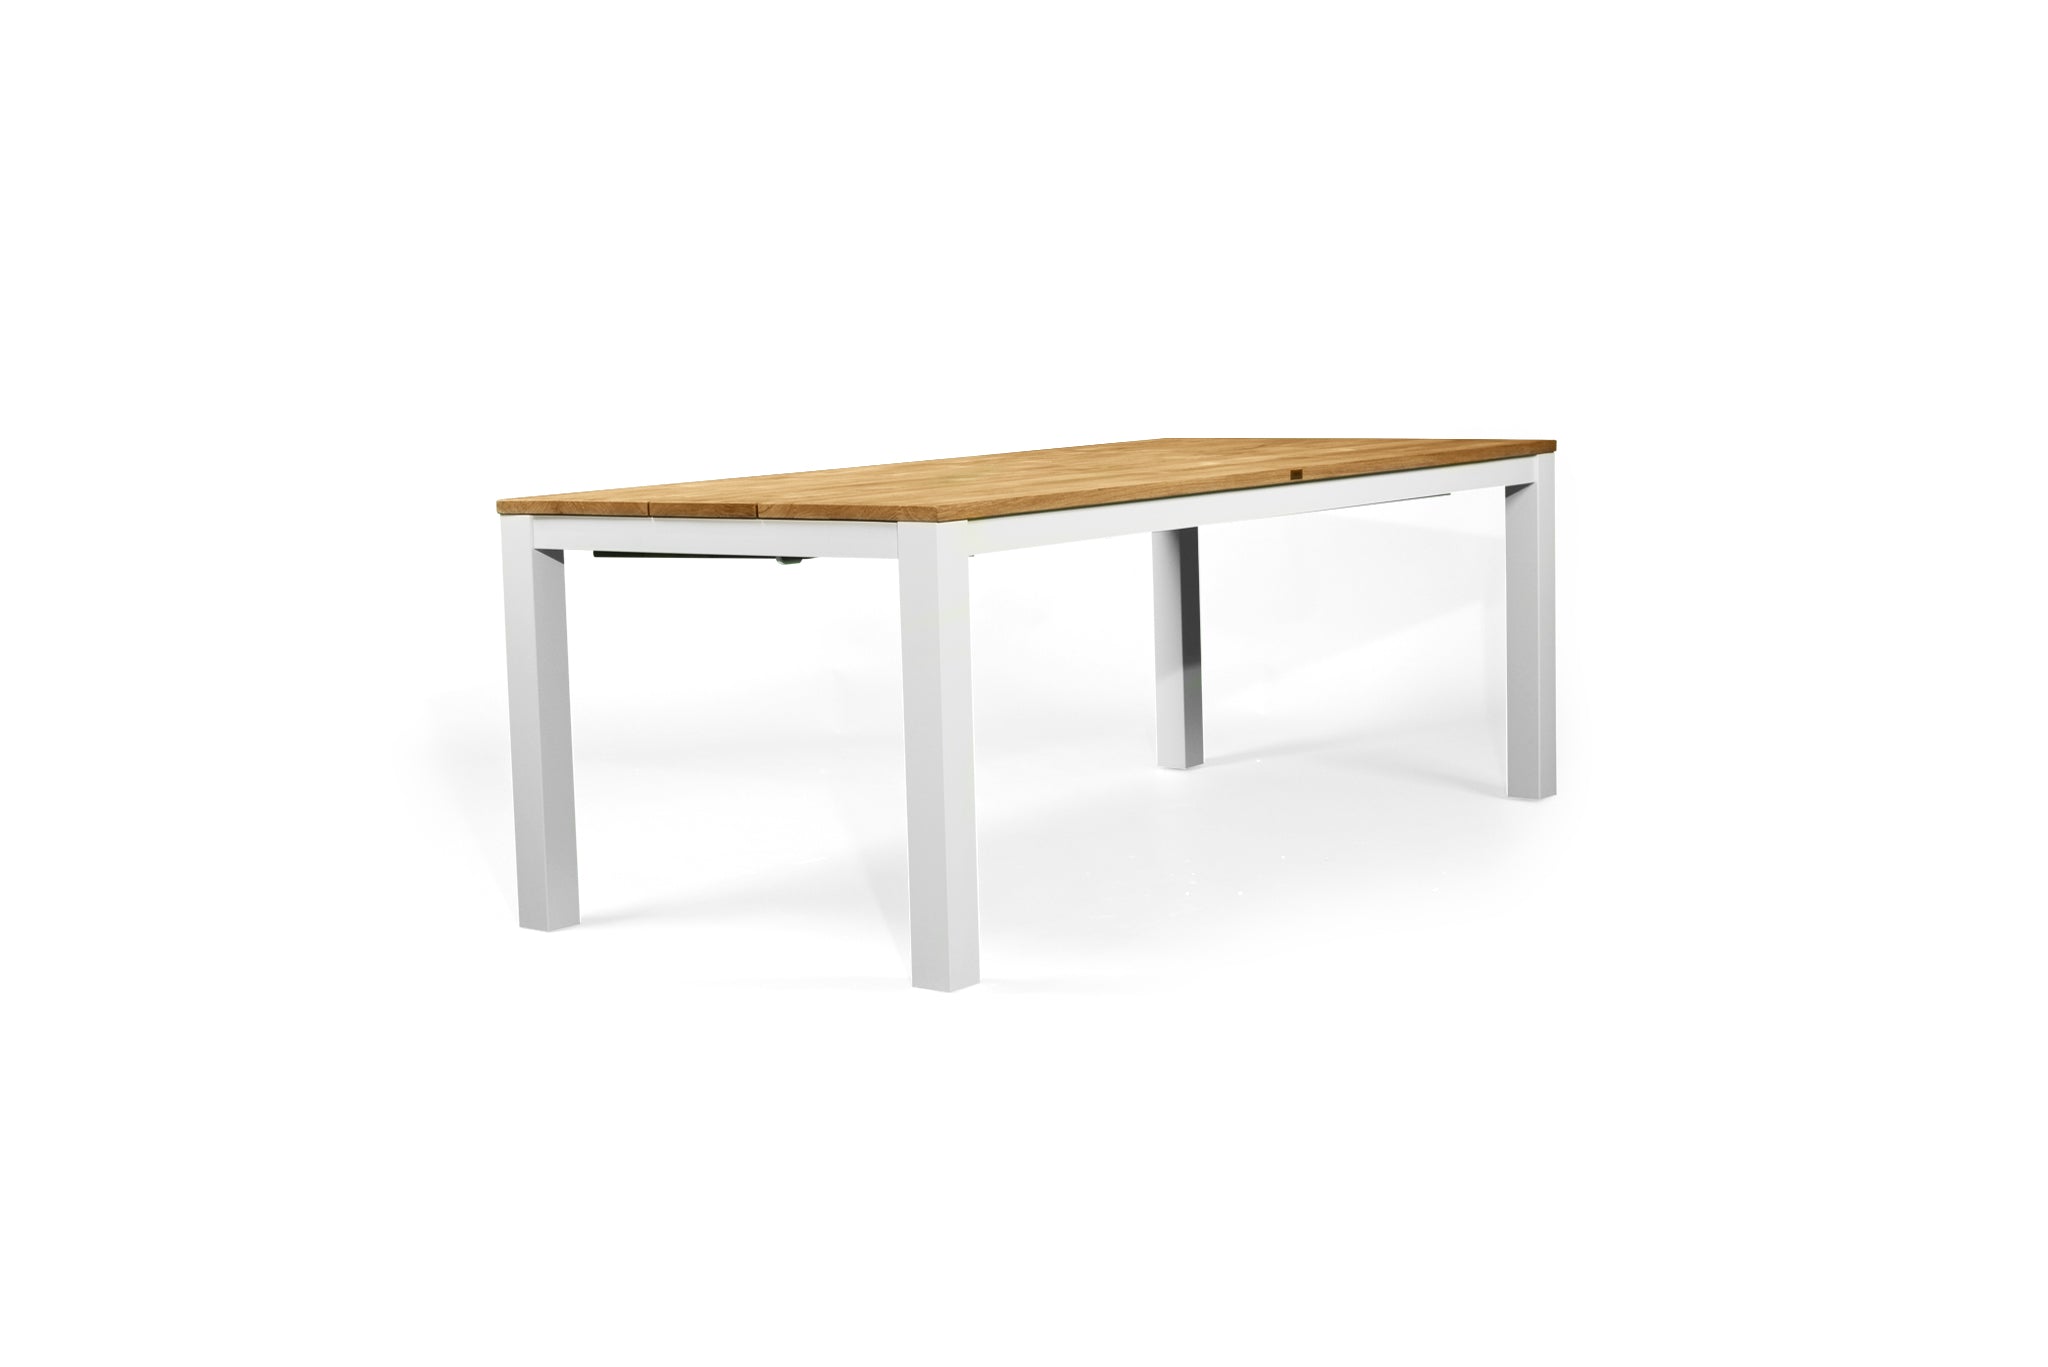 Rose Bay Outdoor Extension Table 3.1m – White Powder Coated Legs